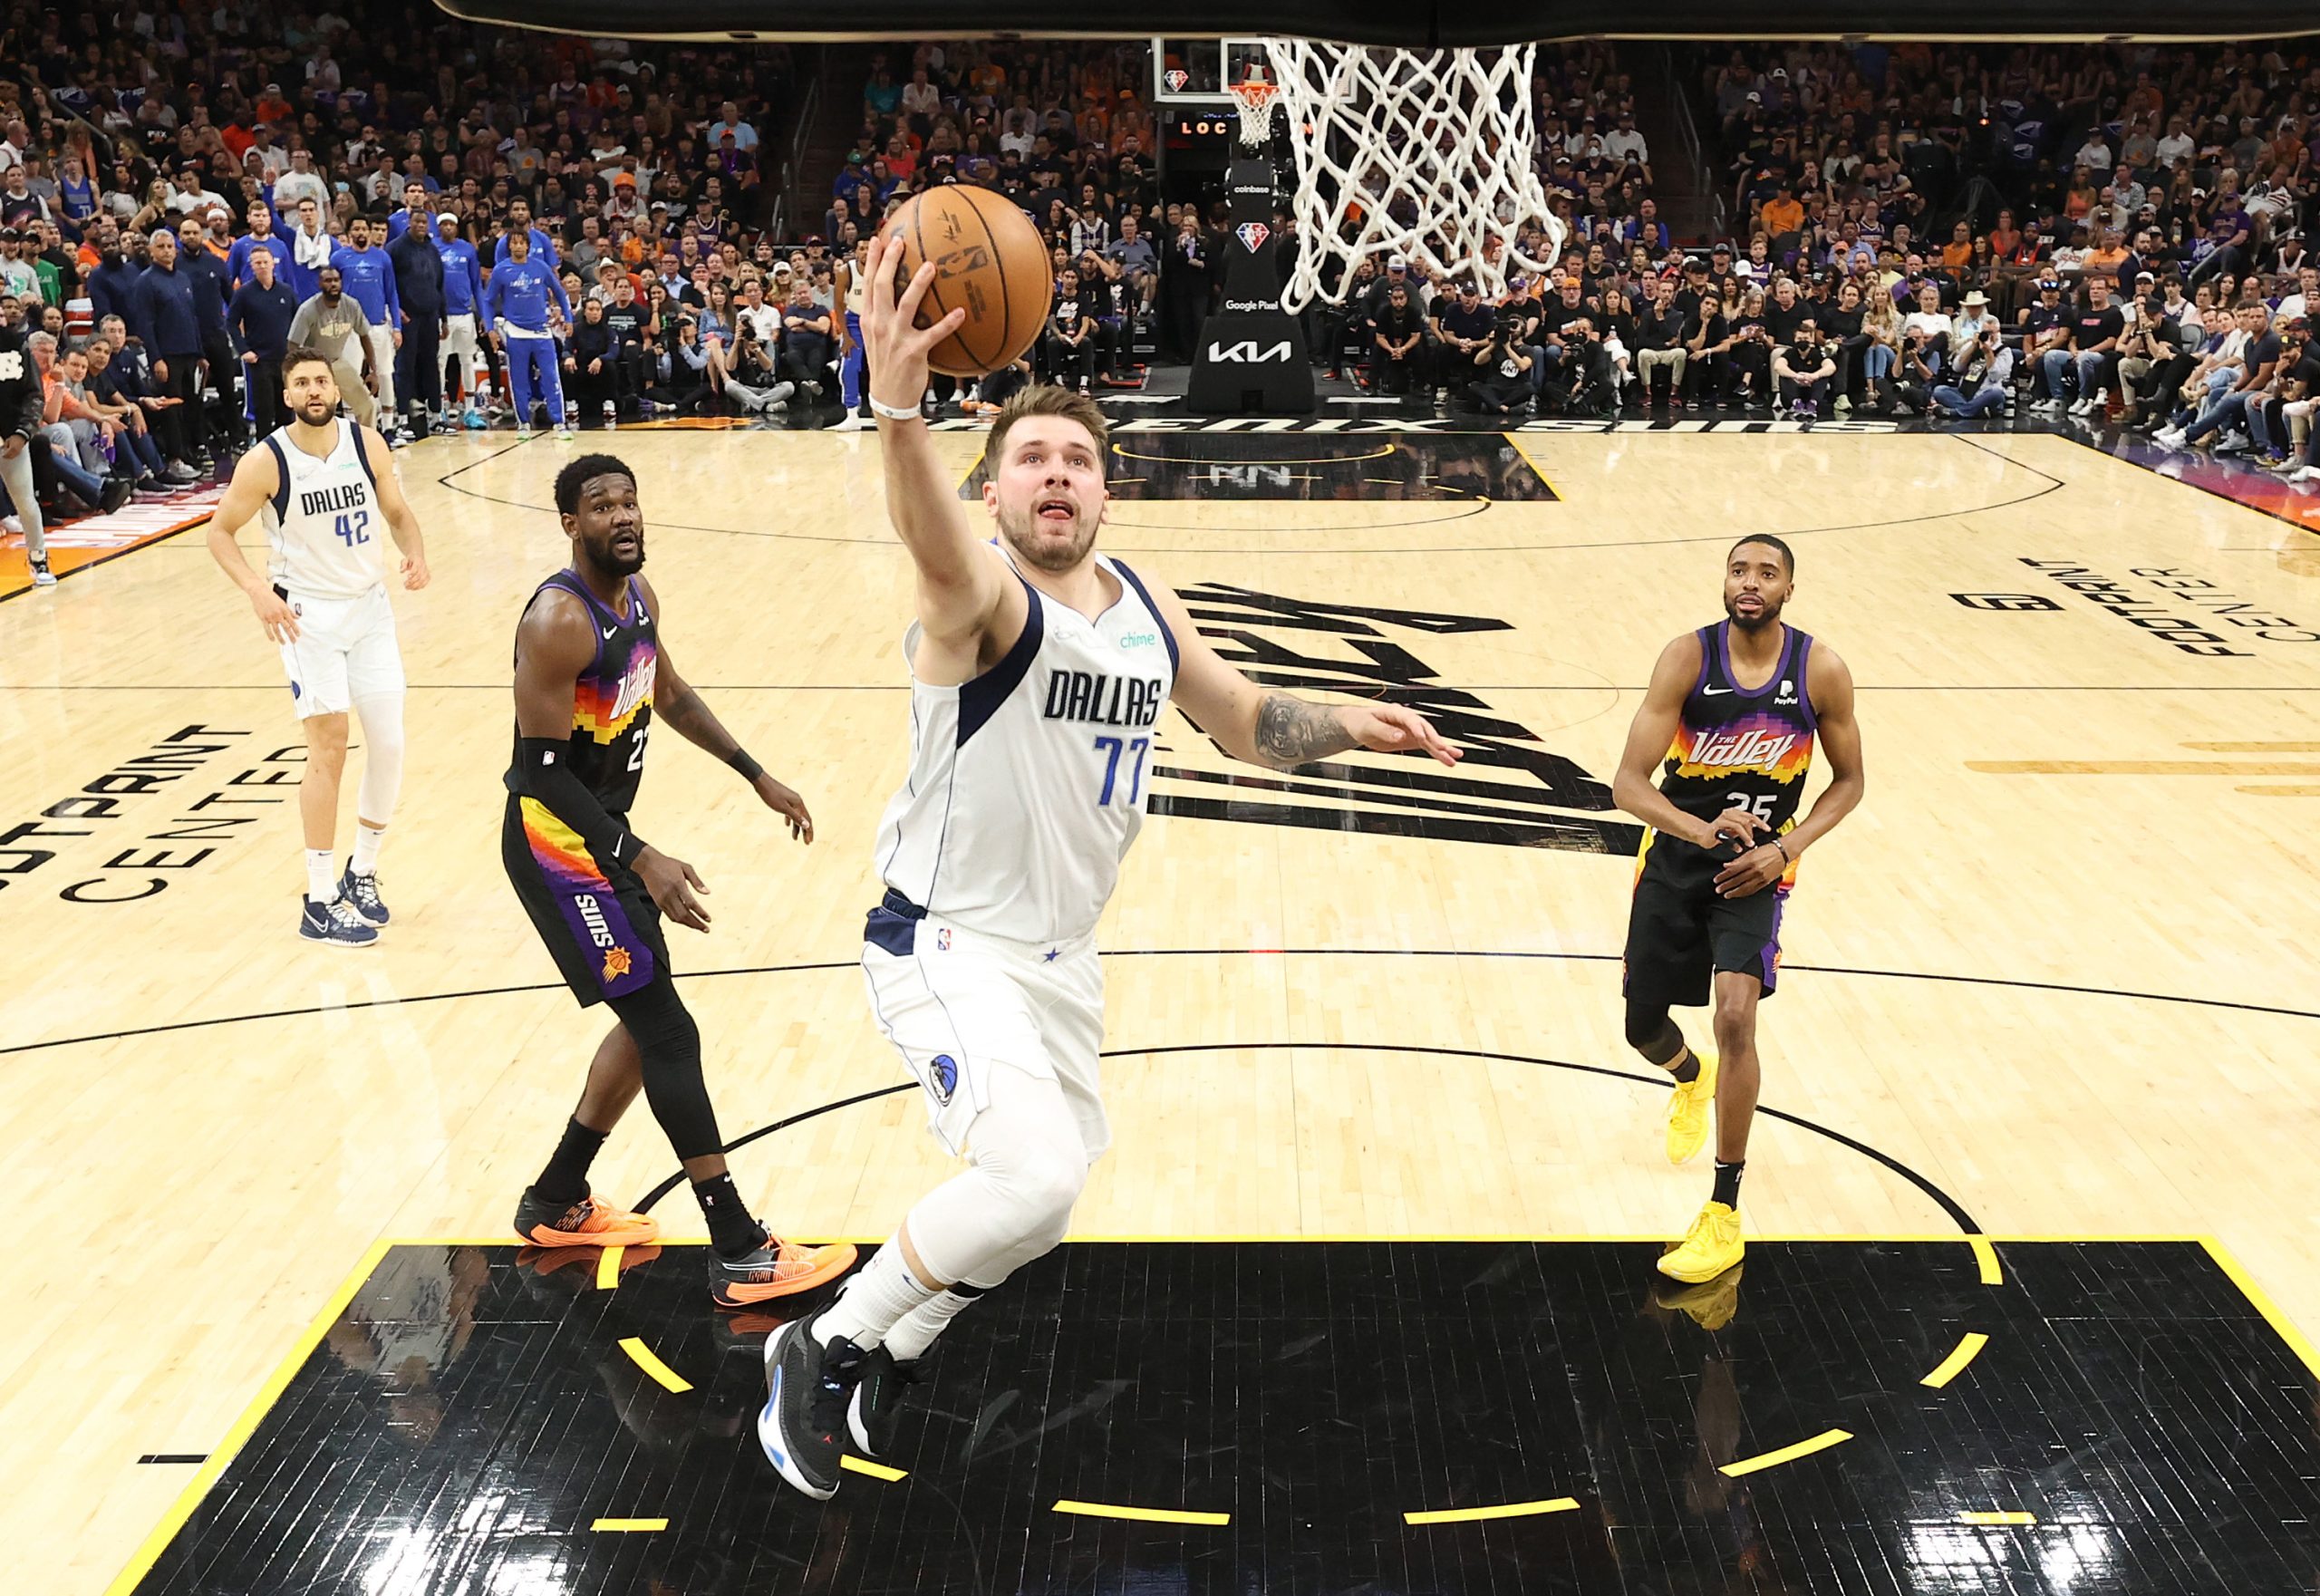 Luka Doncic Is So Special That He Forced the Phoenix Suns Into Putting Out an Unexpected Statement